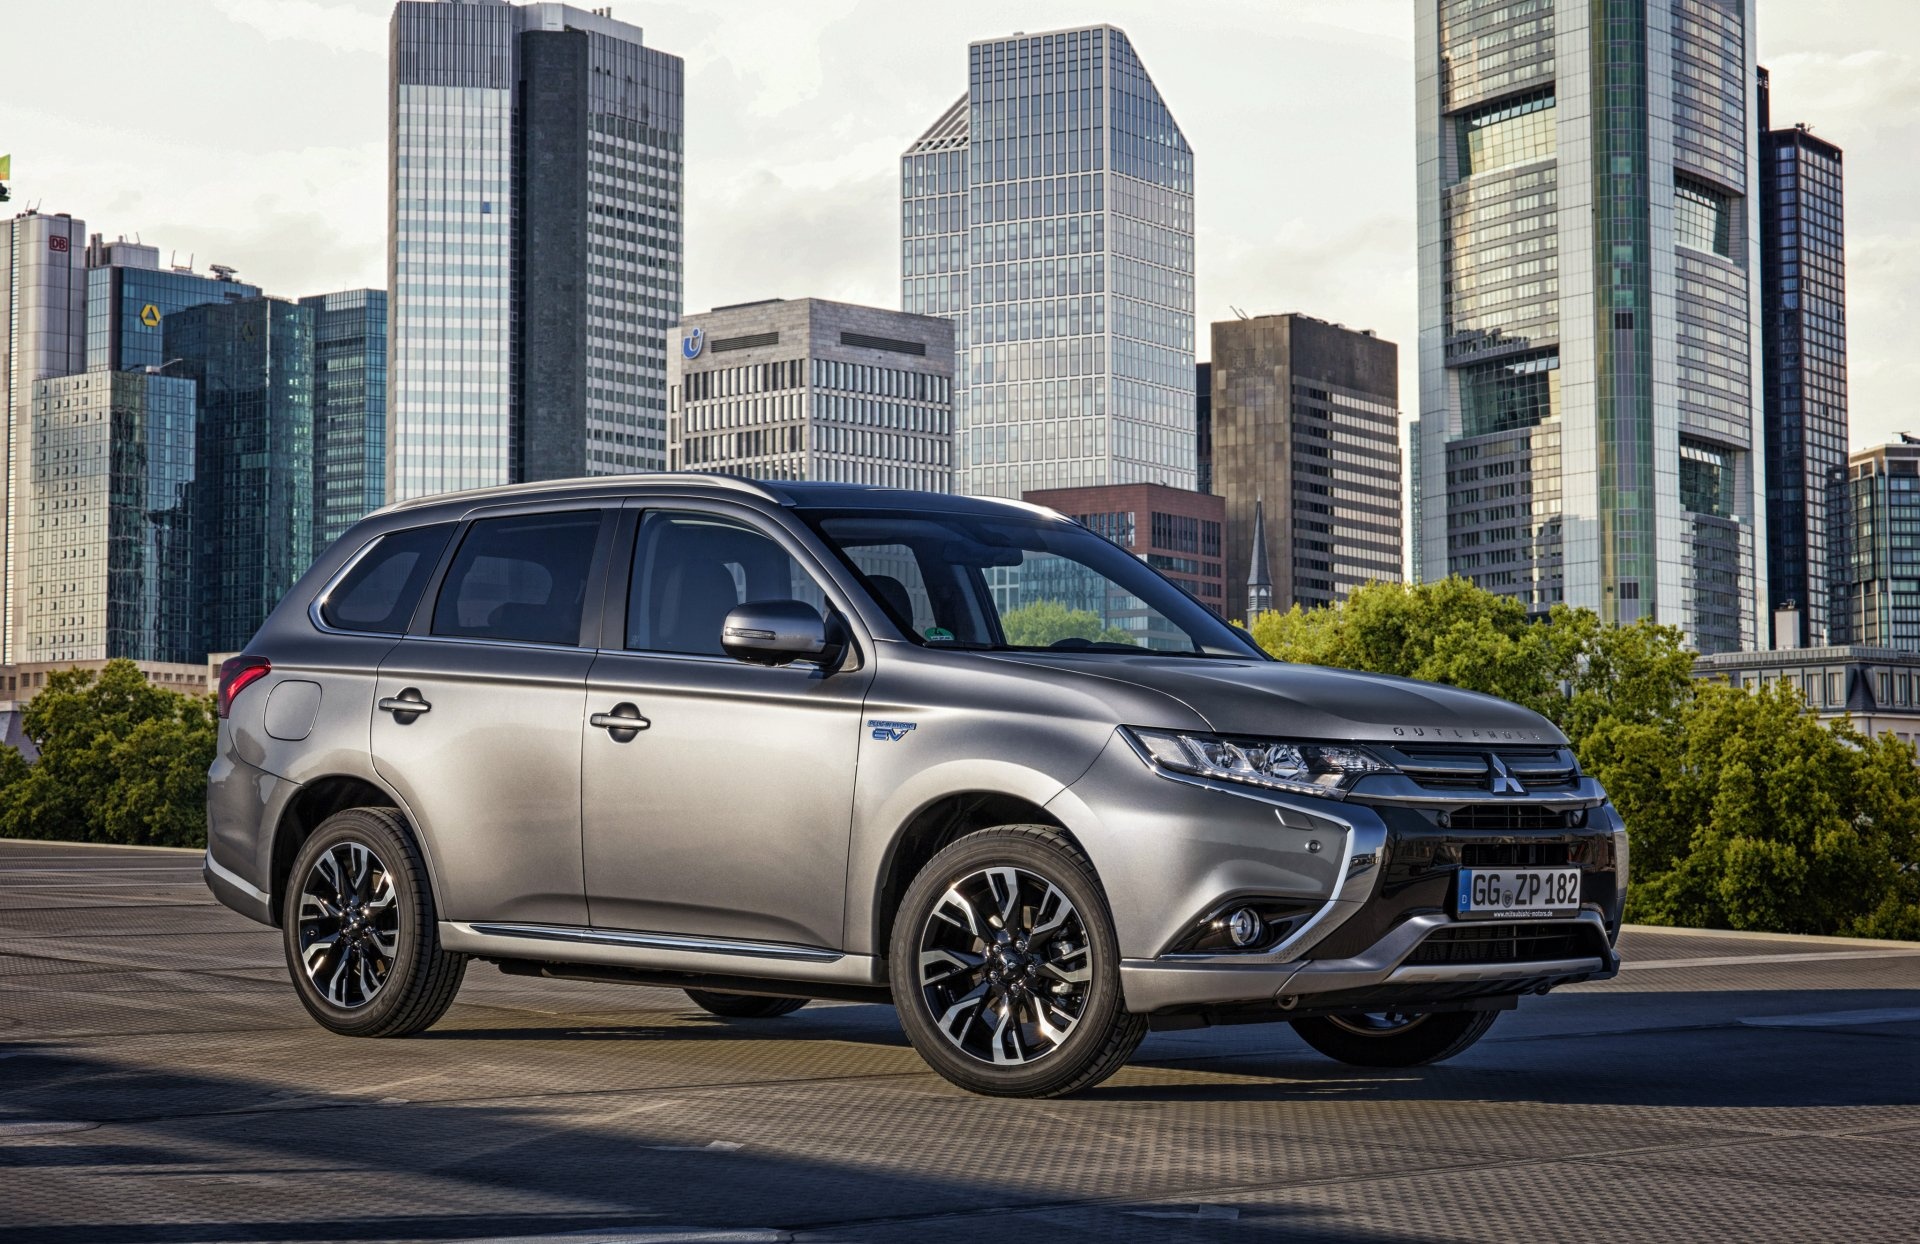 Mitsubishi Outlander, 4K wallpapers, Stylish SUV, High-resolution pictures, 1920x1250 HD Desktop